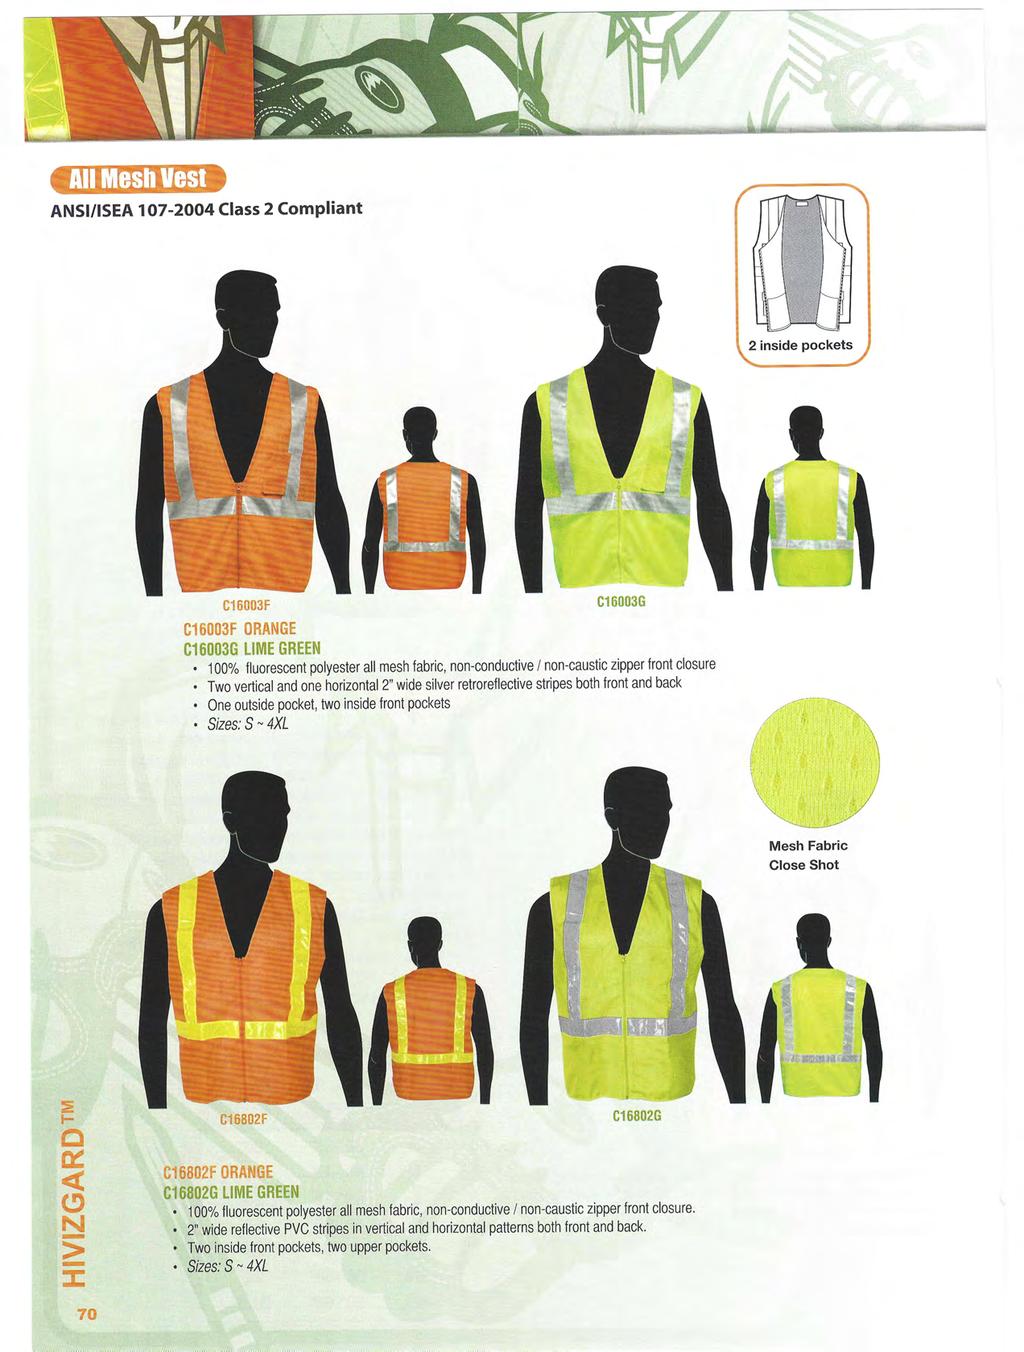 2 inside pockets C163F C163F ORANGE C163G LIME GREEN C163G 1% fluorescent polyester all mesh fabric, non-conductive / non-caustic zipper front closure Two vertical and one horizontal 2 wide silver